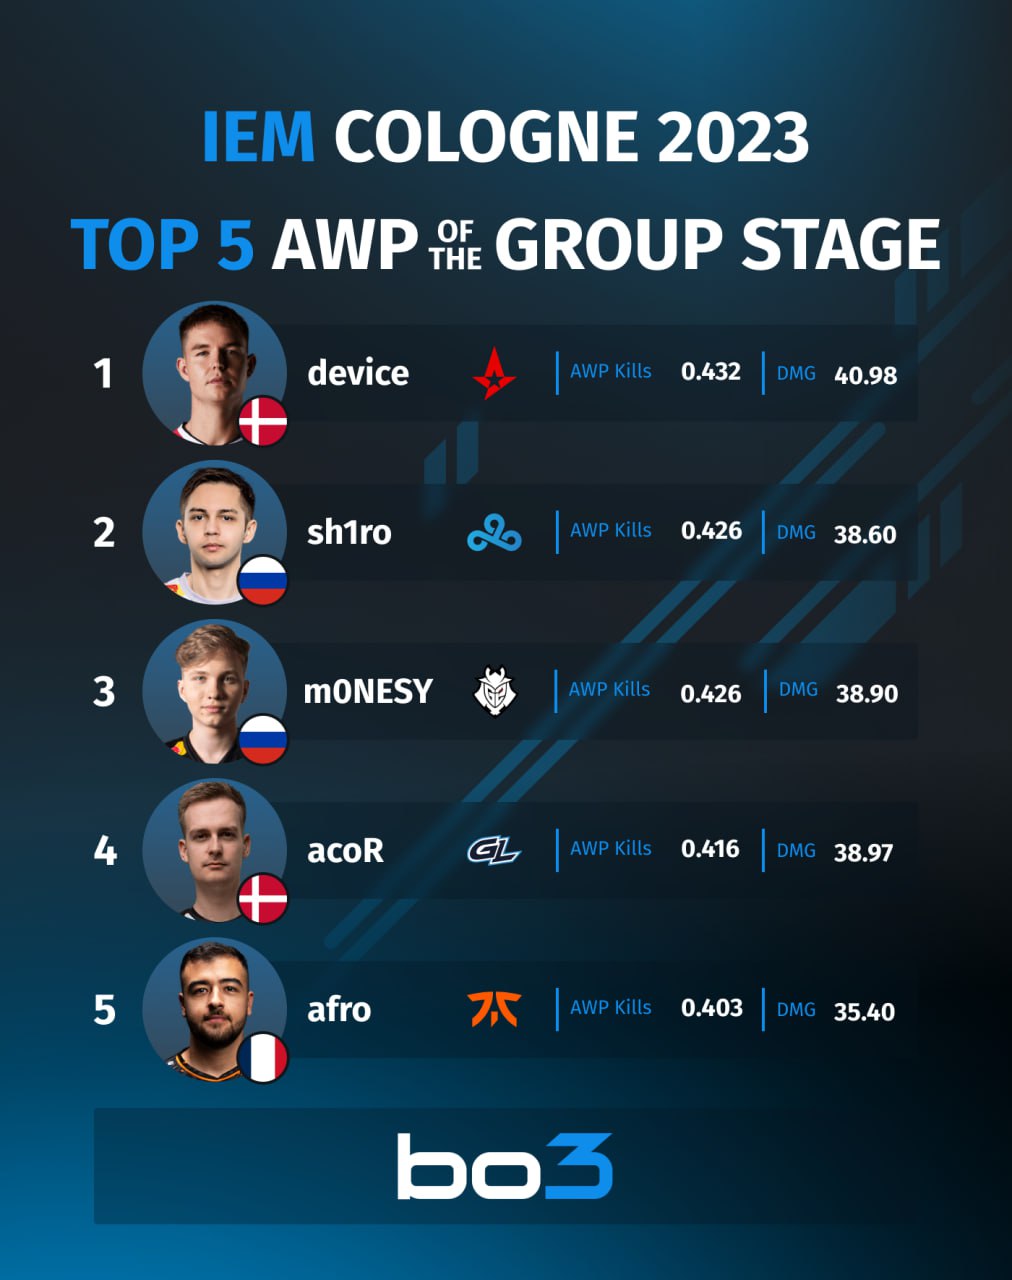 top 5 snipers from the group stage of IEM Cologne 2023: